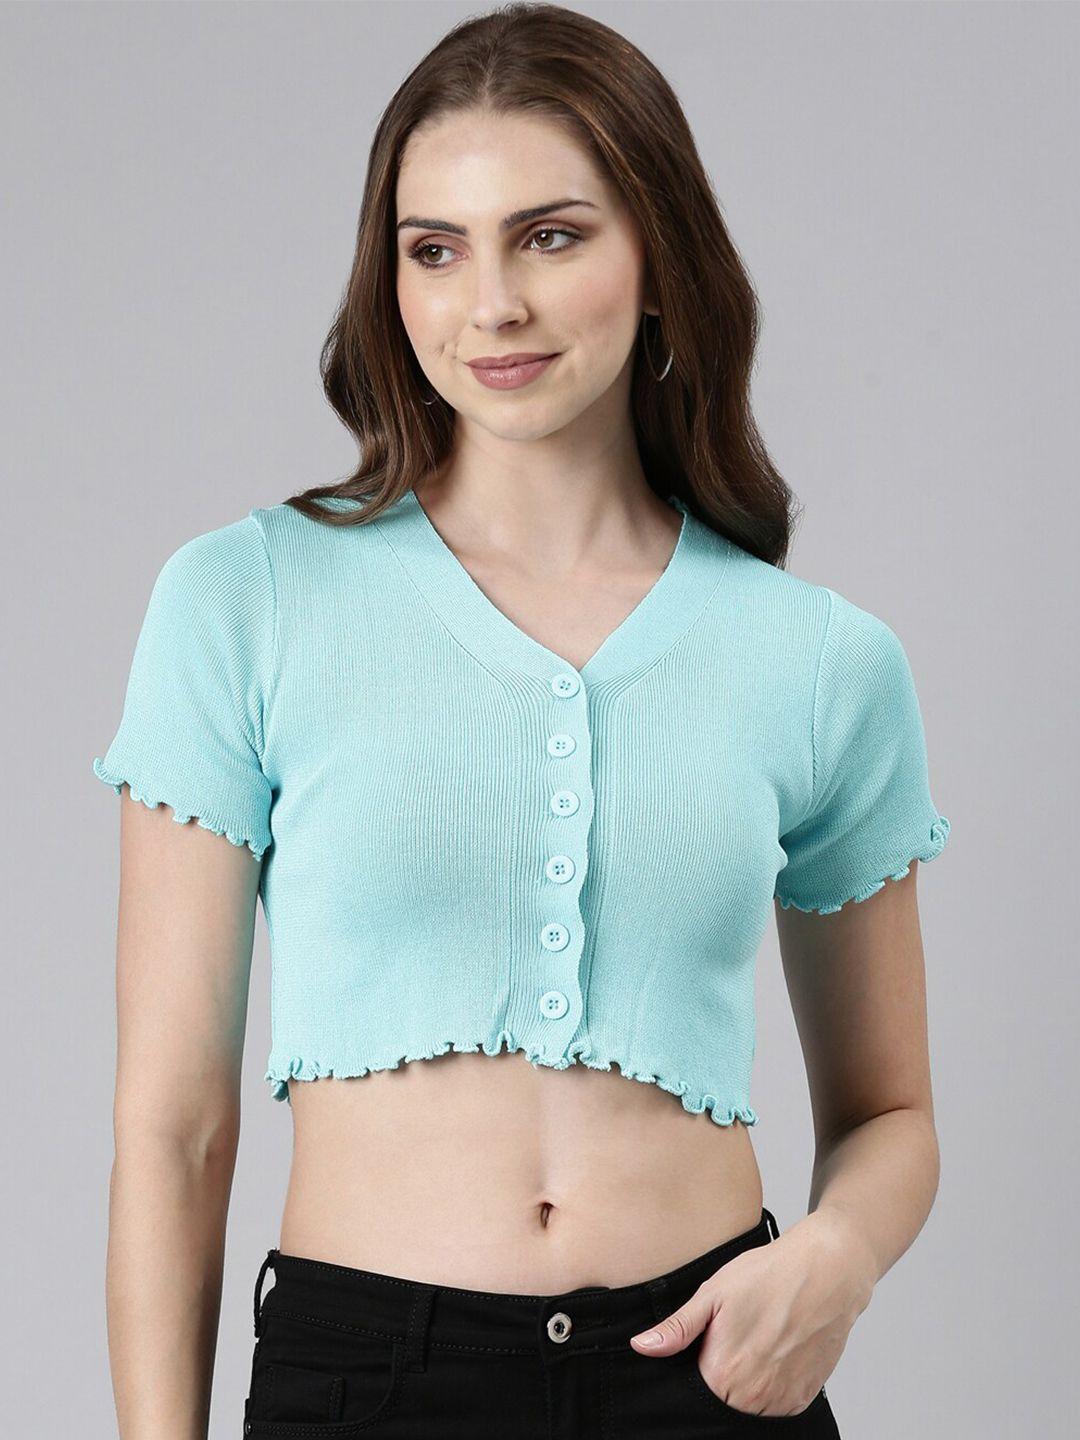 showoff-v-neck-fitted-acrylic-crop-top